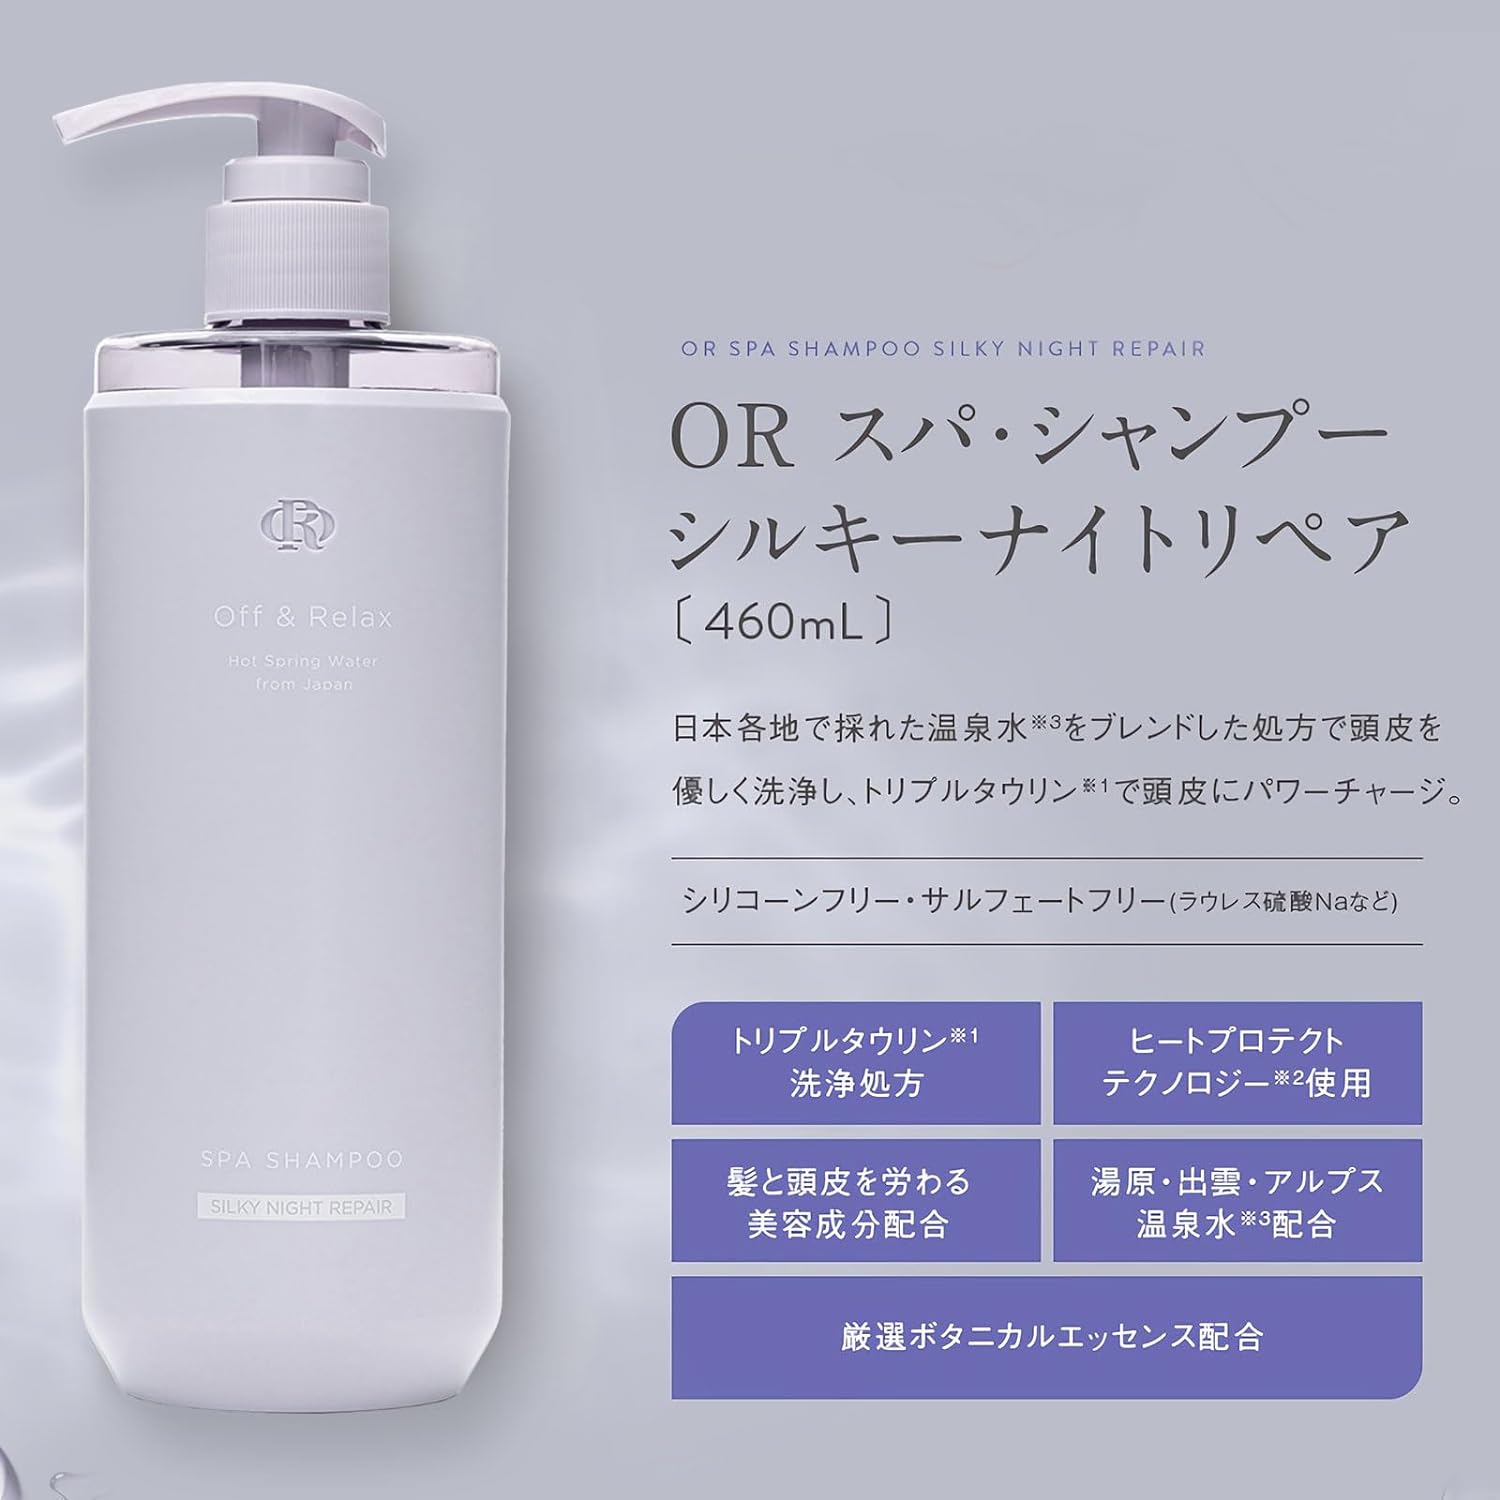 Off & Relax Spa Silky Night Repair 460ml - Off&Relax | Kiokii and...